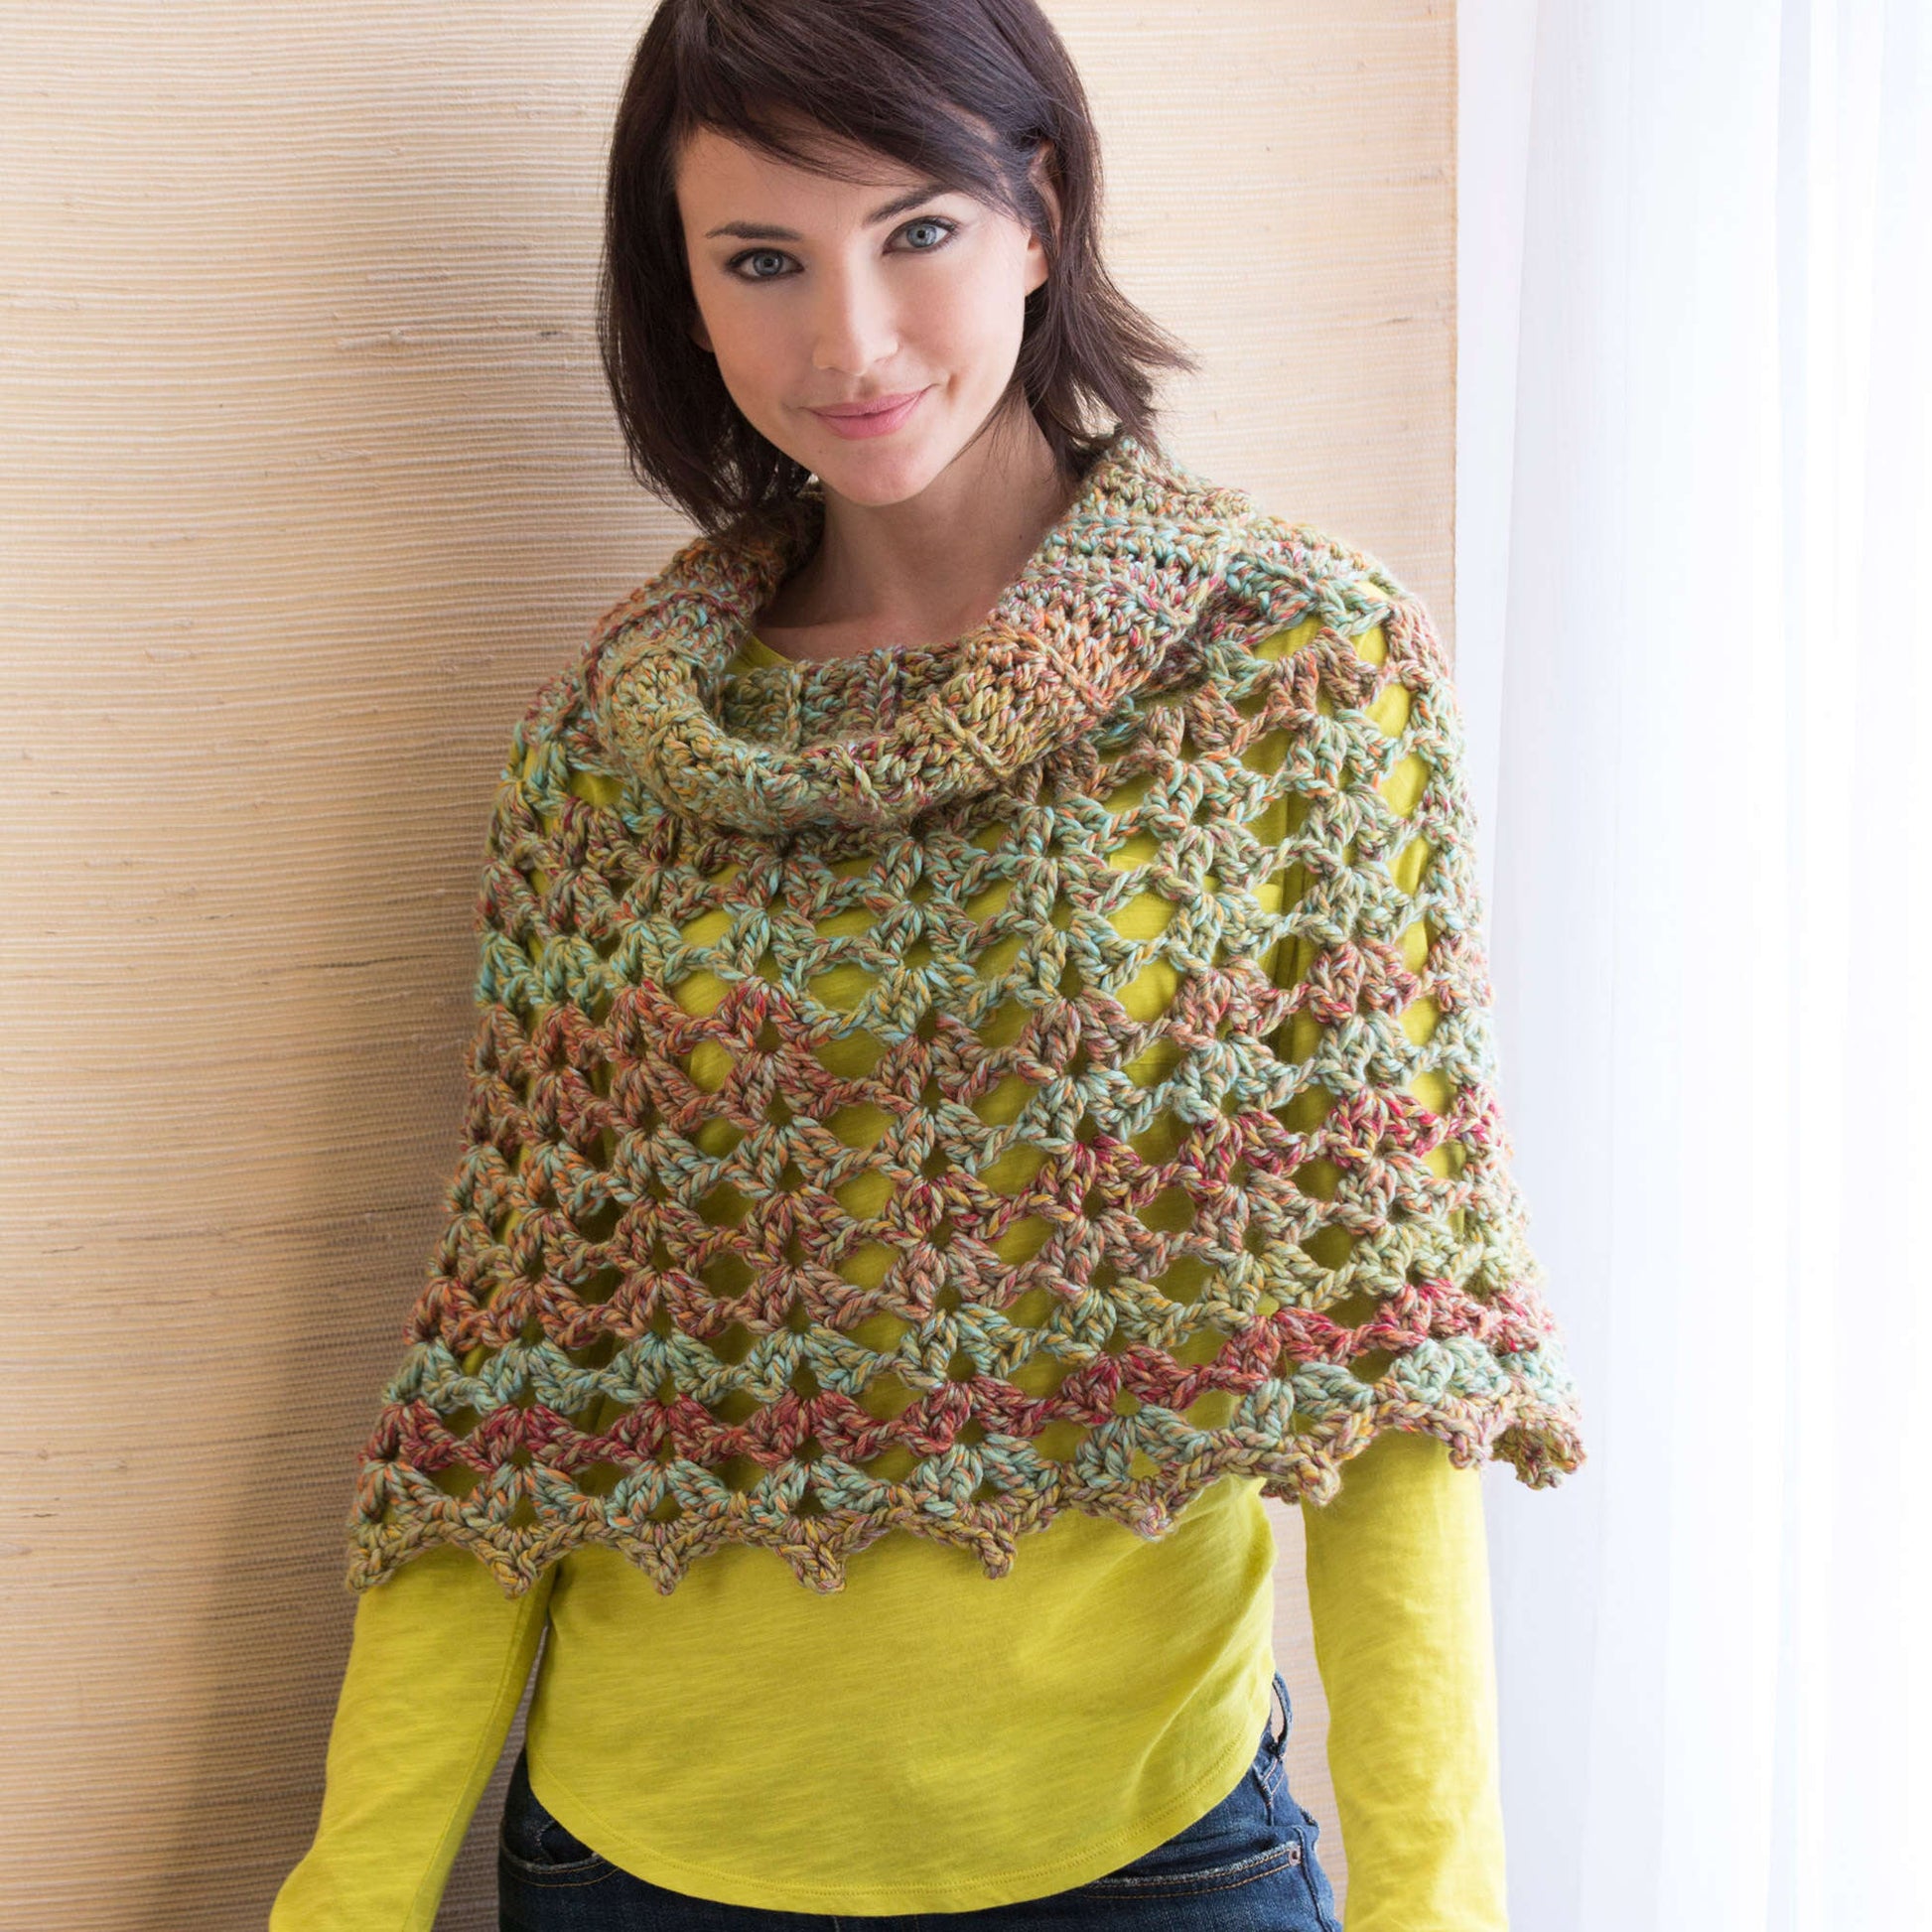 Free Red Heart Crochet Chic Cowl Neck Poncho Pattern